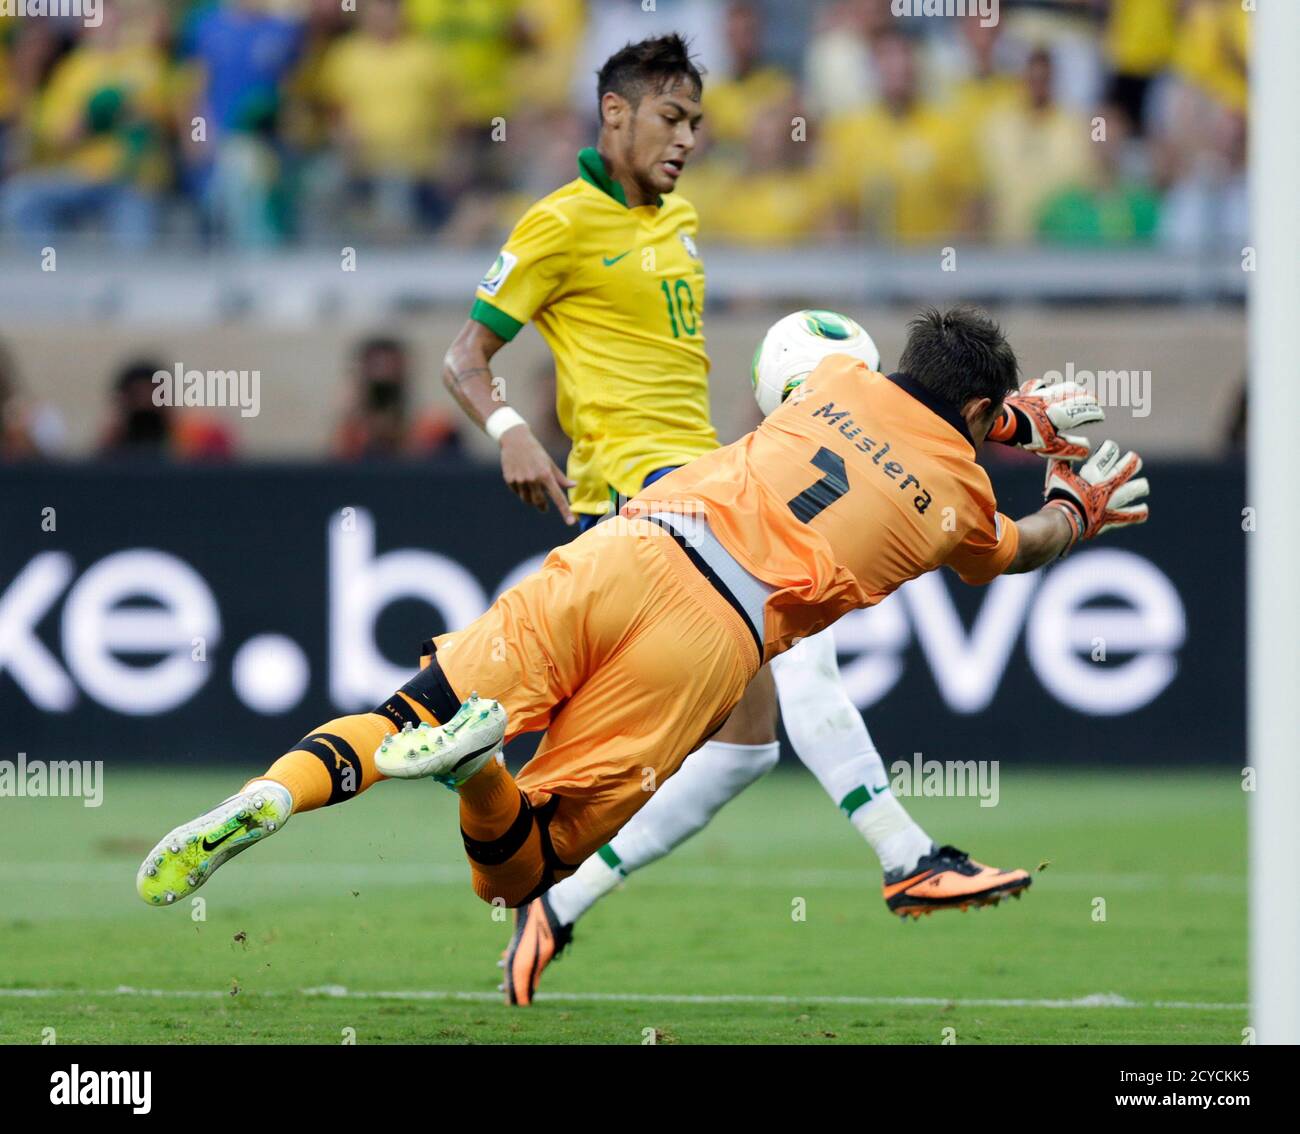 Brazil's Neymar fights for the ball with Uruguay's goalkeeper Fernando  Muslera during their Confederations Cup semi-final soccer match at the  Estadio Mineirao in Belo Horizonte June 26, 2013. REUTERS/Ricardo Moraes  (BRAZIL -